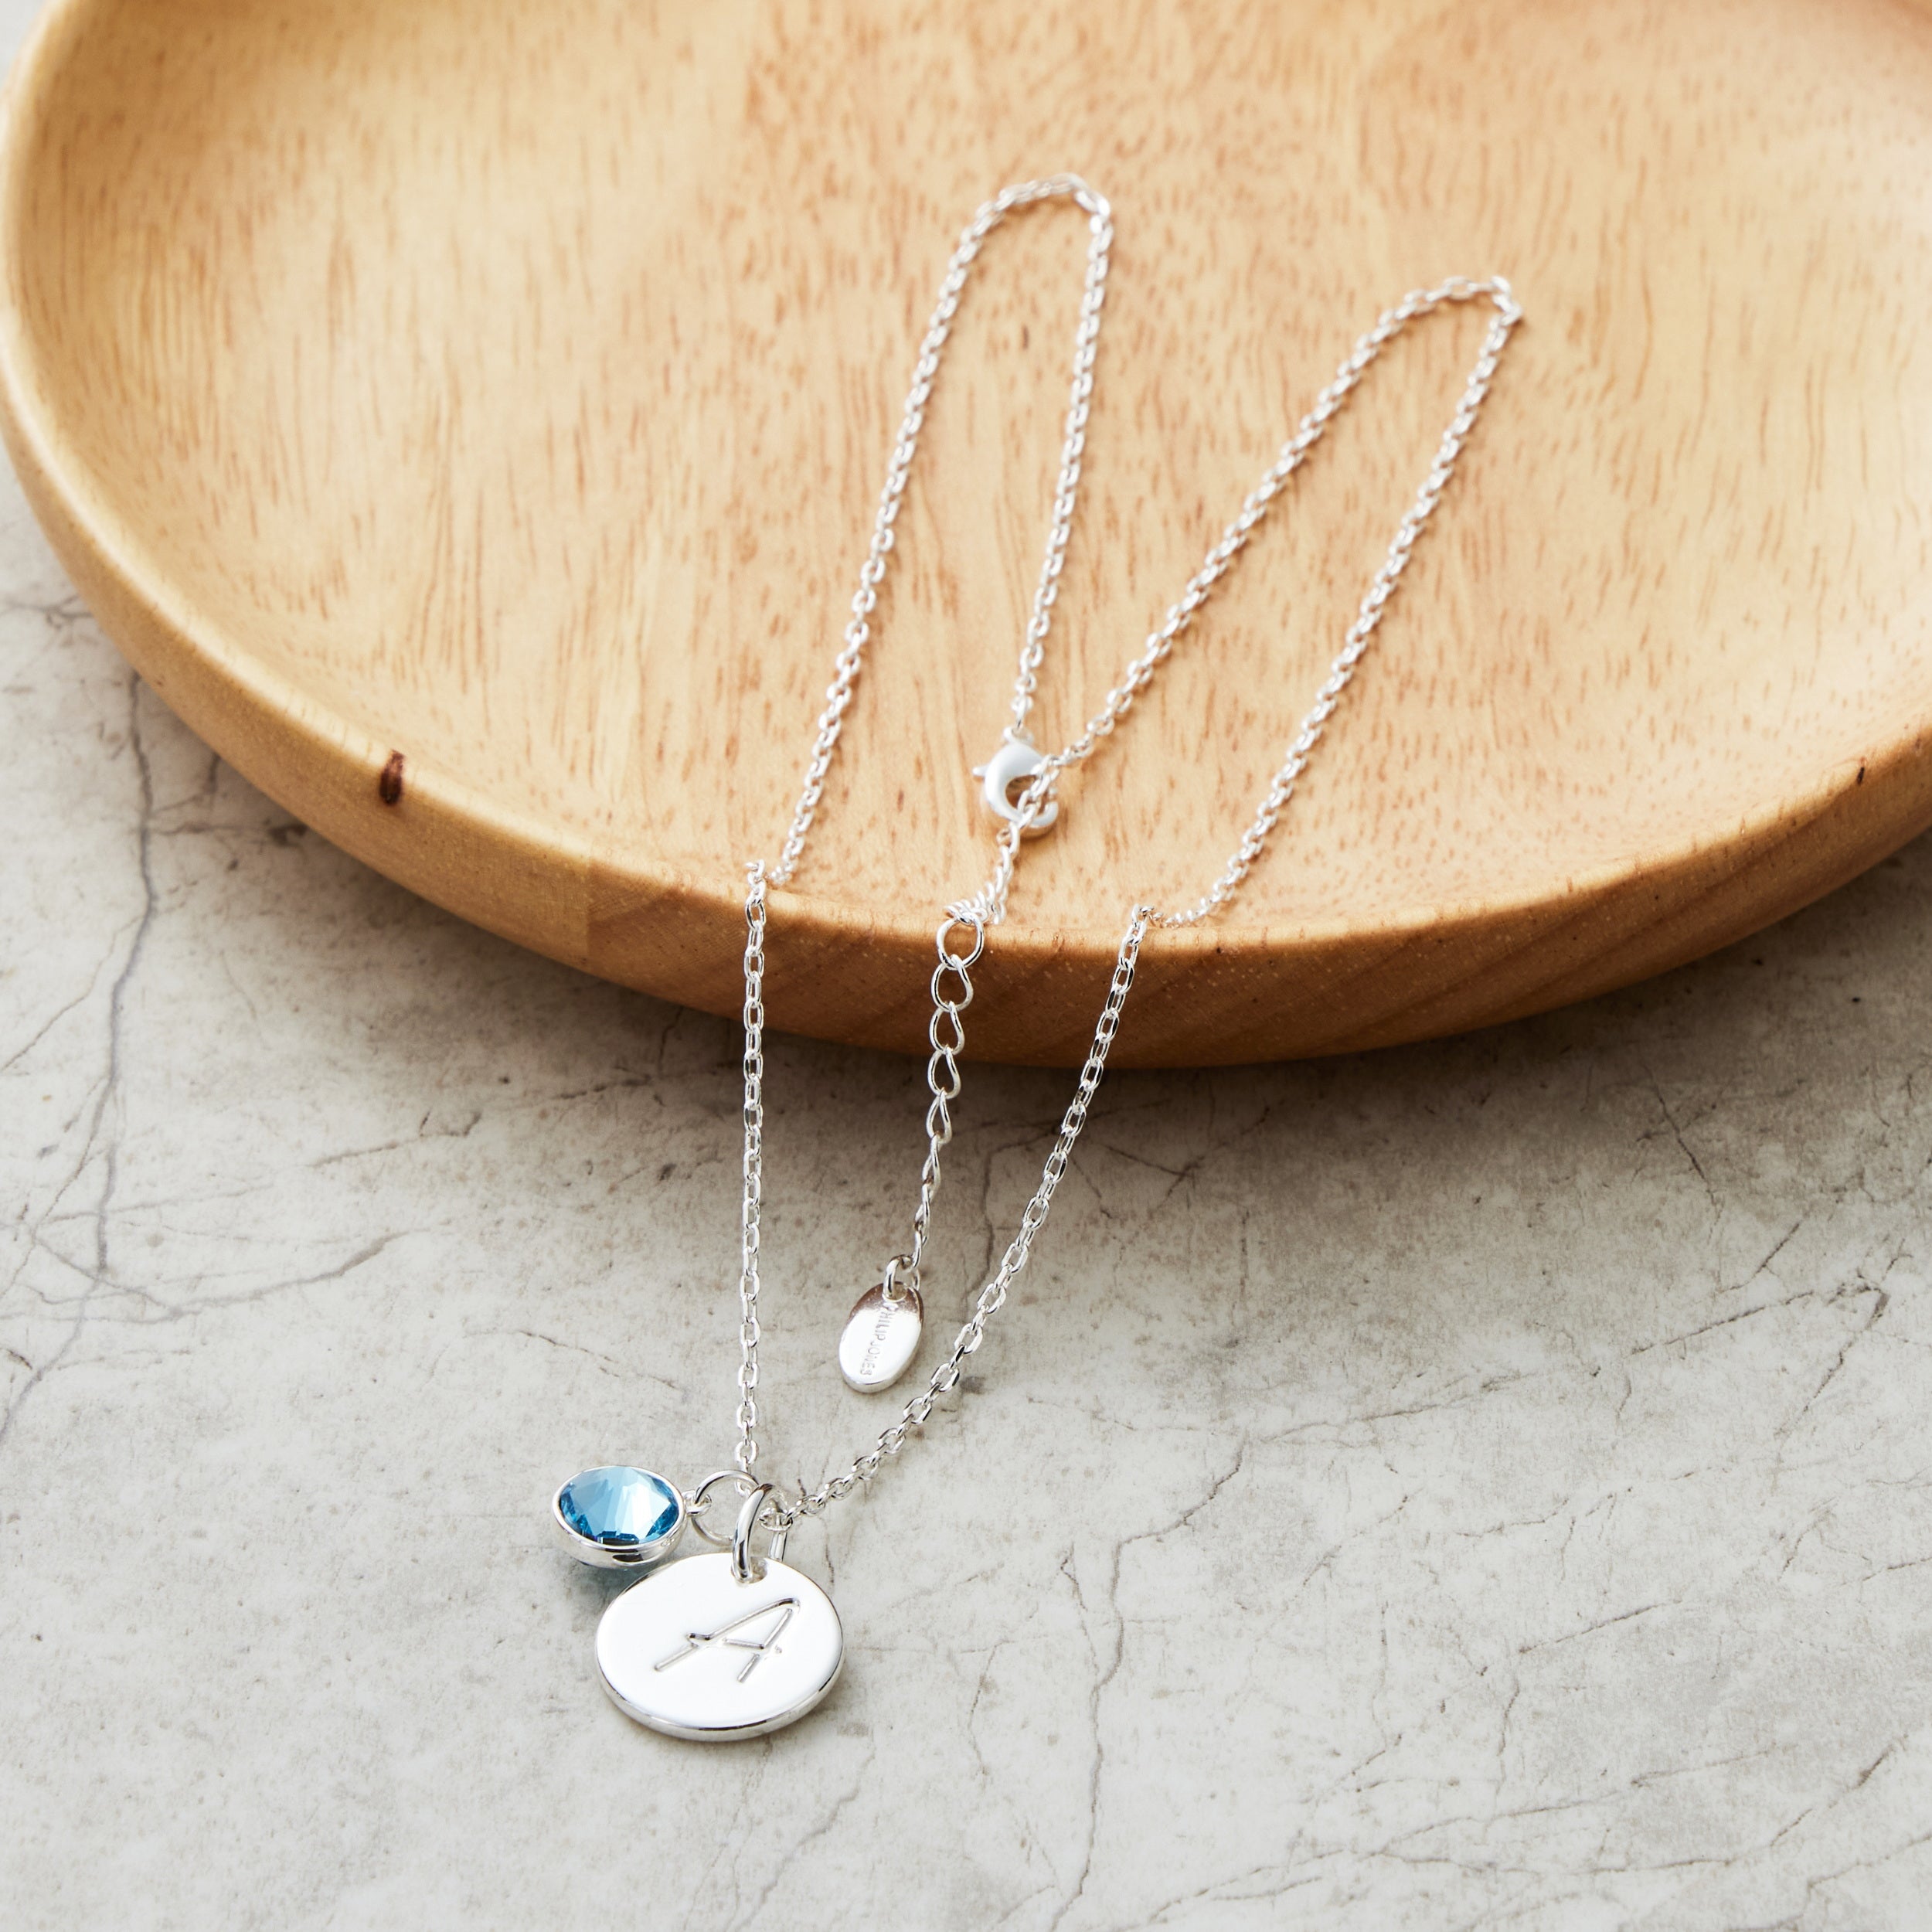 March (Aquamarine) Birthstone Necklace with Initial Charm (A to Z) Created with Zircondia® Crystals